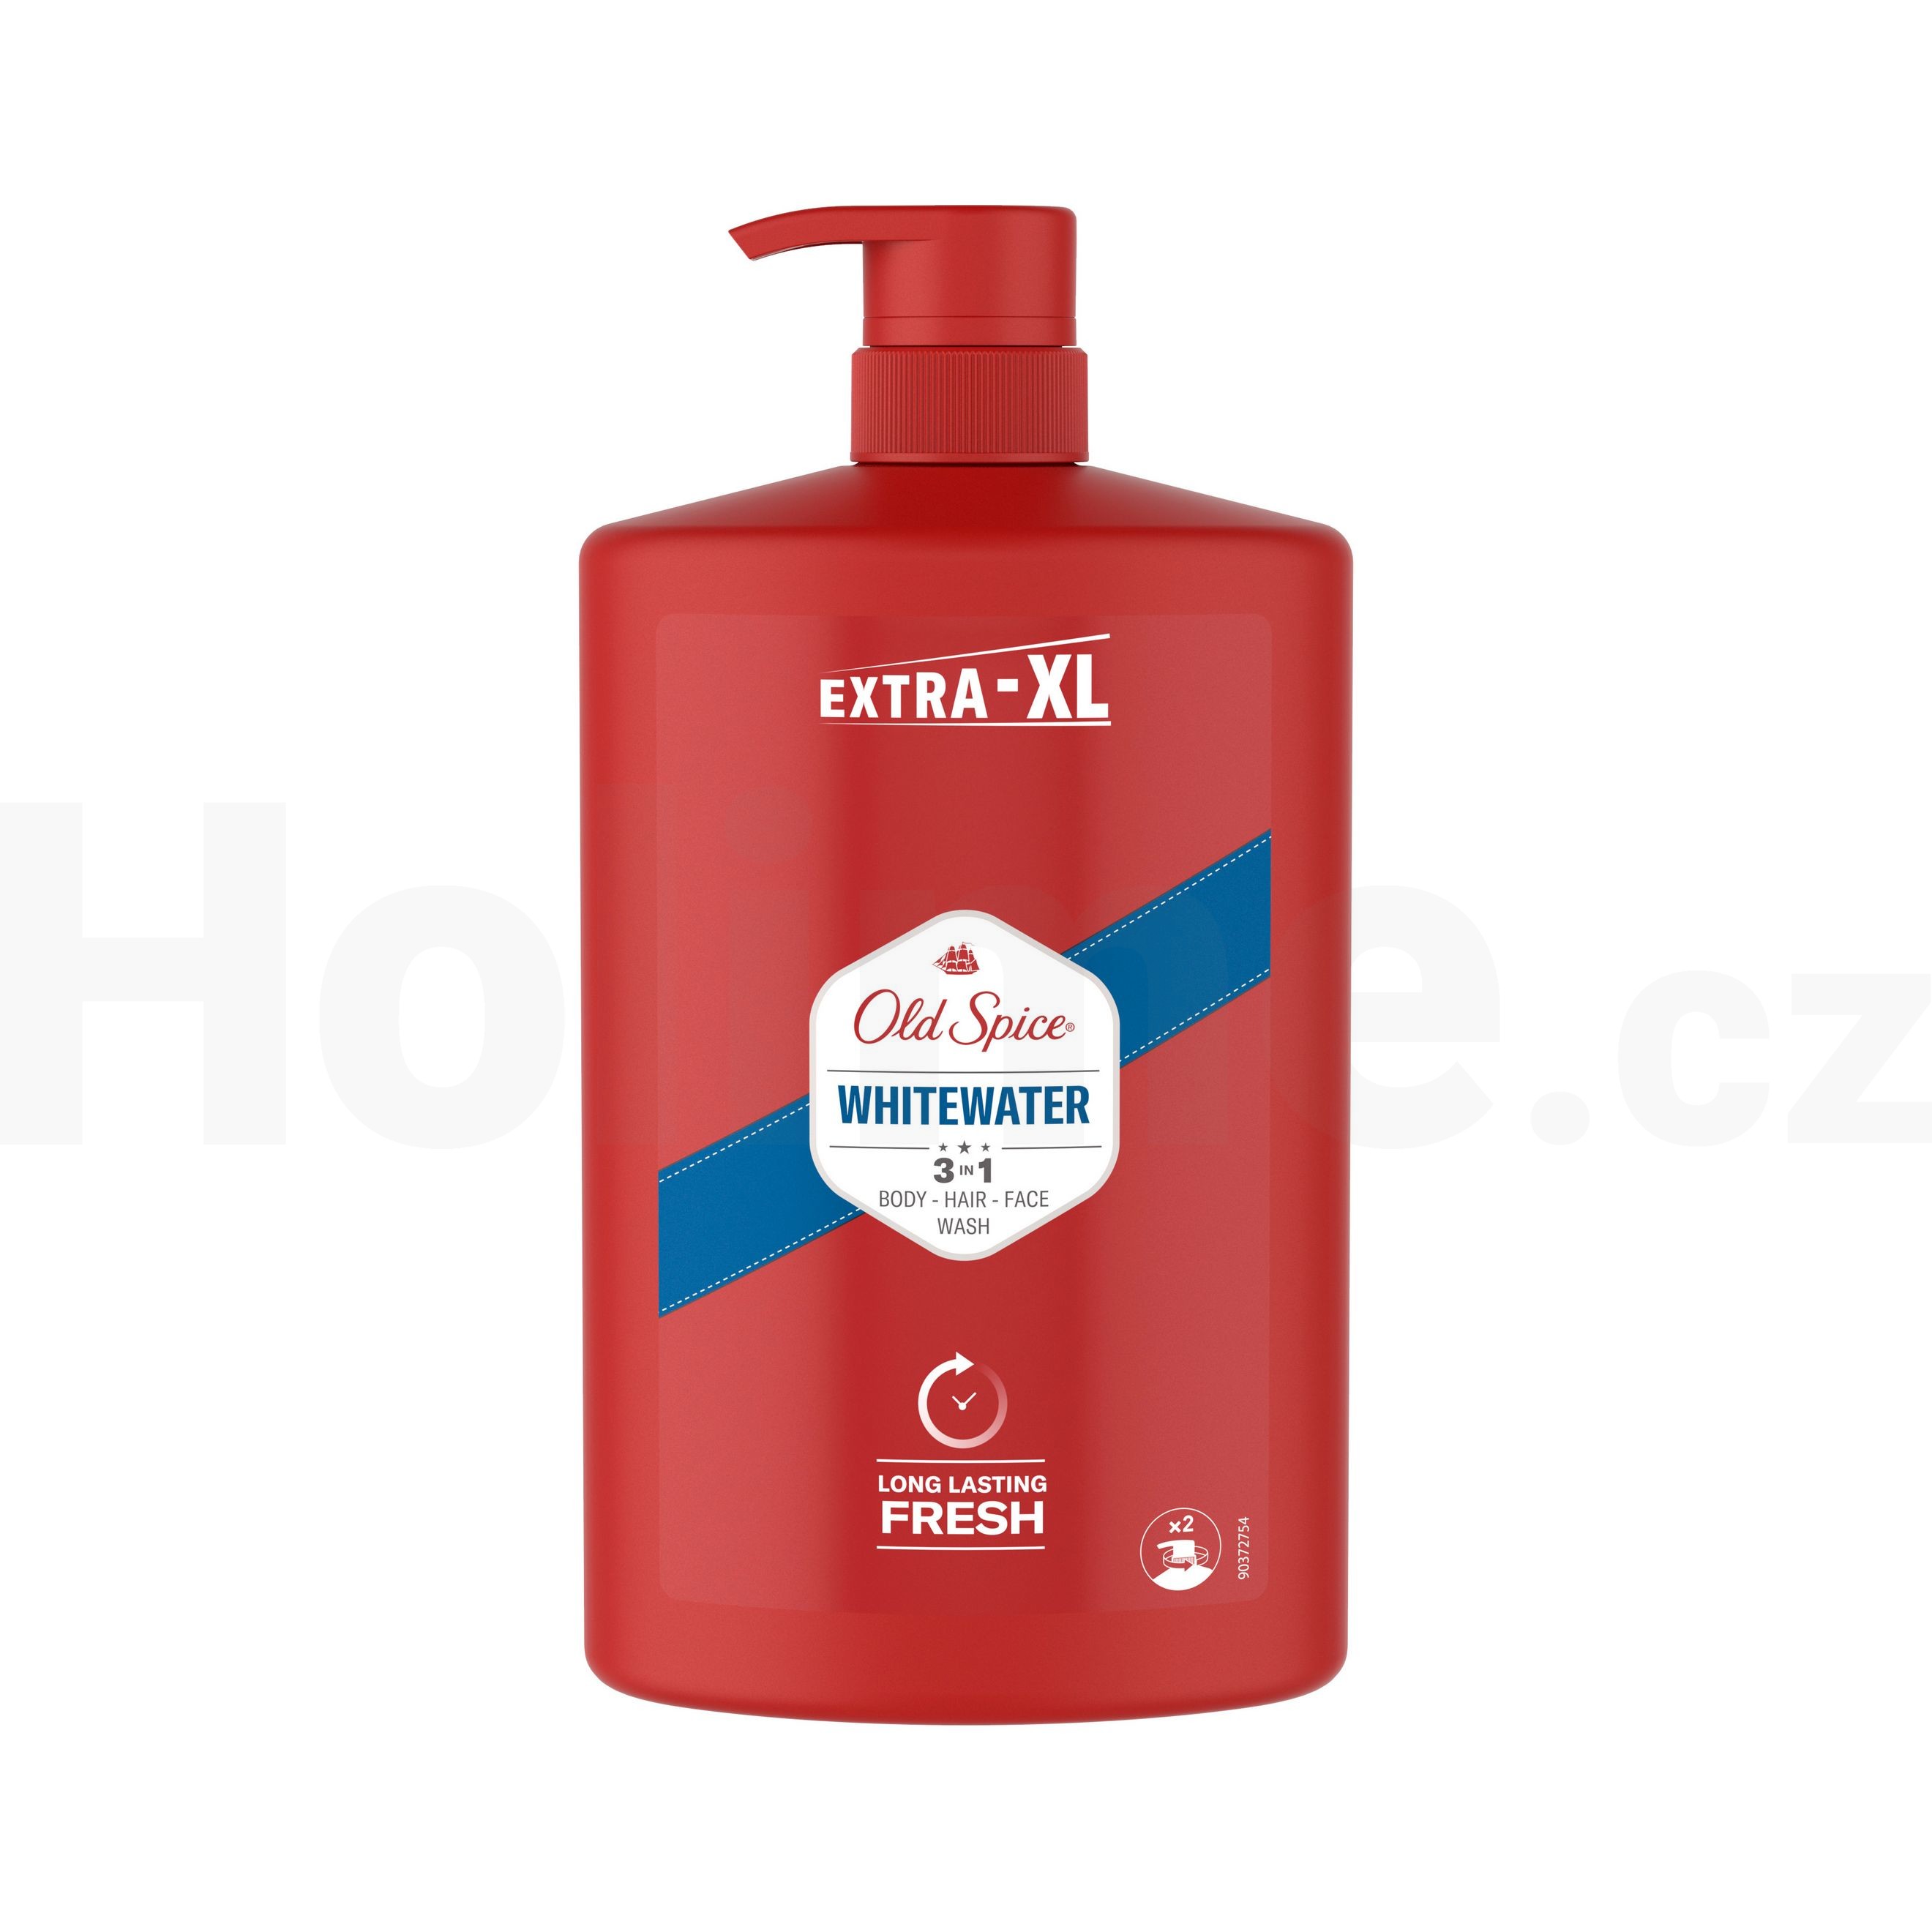 Old Spice Whitewater sprchový gel 1000 ml